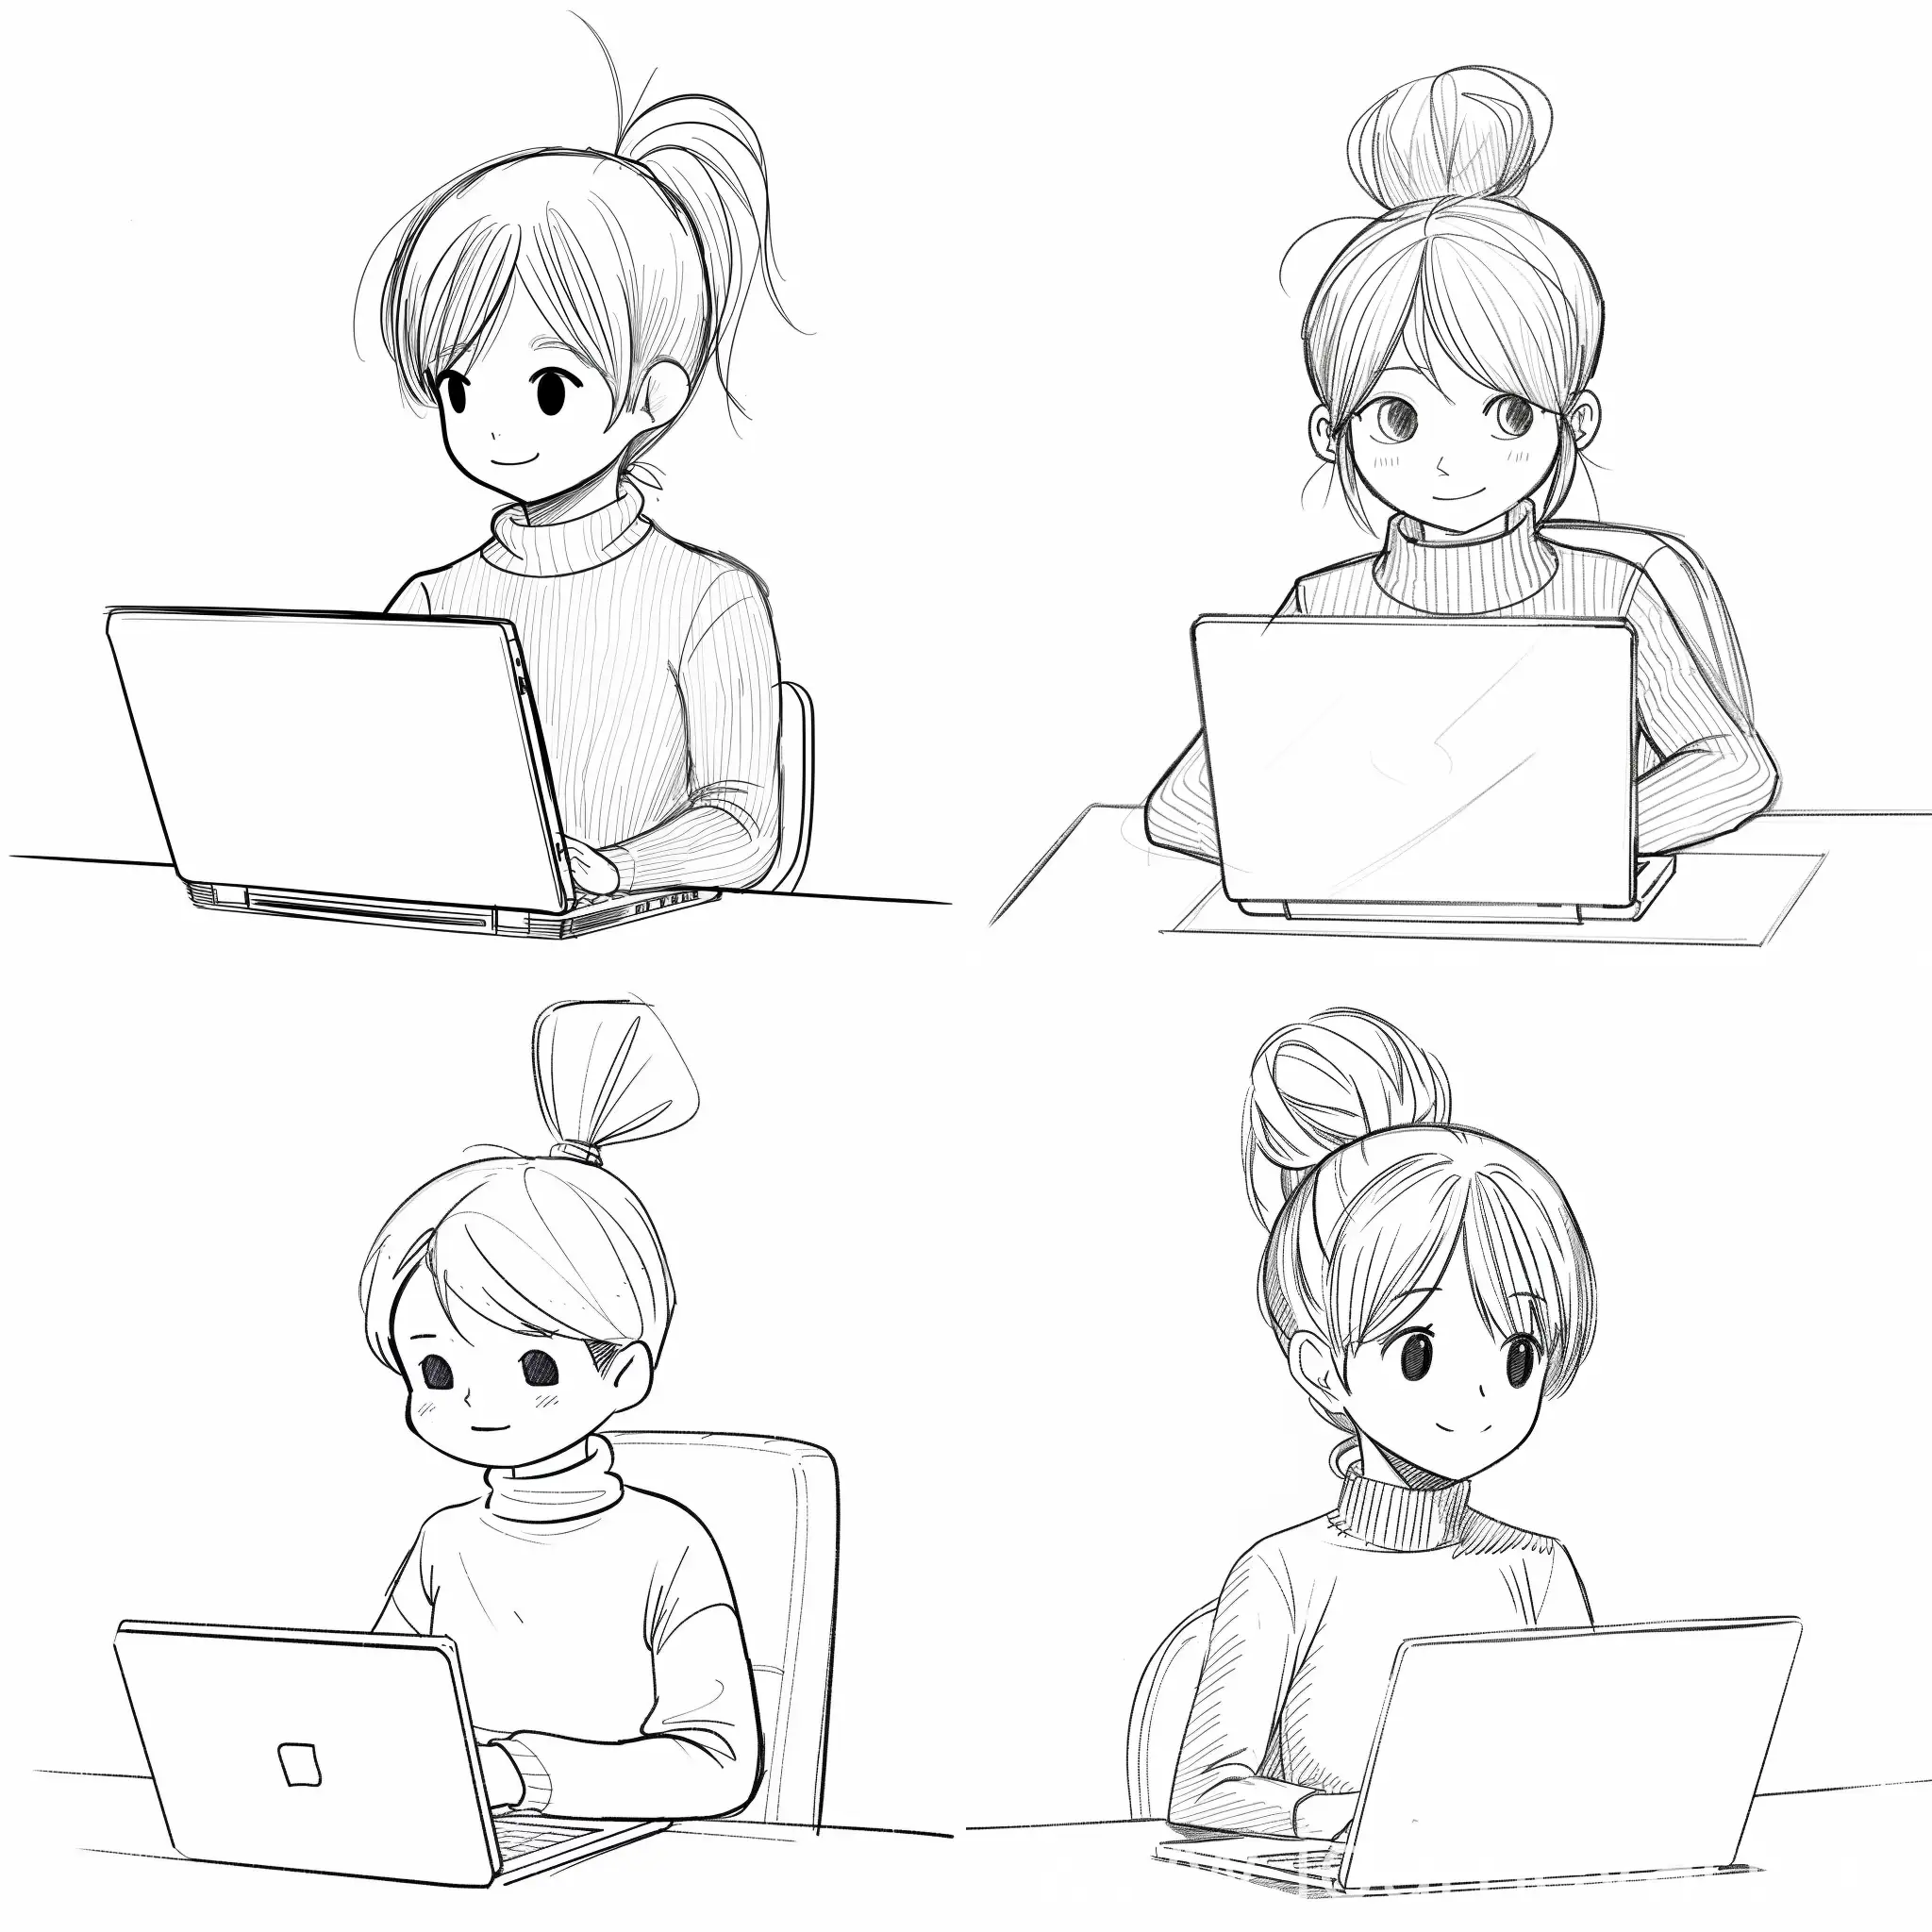 "Create a black and white line drawing of a character that exudes a minimalist and modern cartoon style. The character should have a ponytail that playfully sticks up, indicating movement or a casual style. Their face should be drawn with minimal detail: two dots for eyes, a simple angled line for a nose, and a small line for a mouth to convey contentment. They should be wearing a turtleneck sweater, with the collar lightly sketched.  The character should be seated in front of a laptop, which is open on a table. The laptop should be drawn from a perspective that shows both the screen and the keyboard, angled slightly to give depth. The character’s arms should be positioned as if they are typing, but with hands abstracted out, keeping the focus on the character’s face and posture. The background should be left blank to keep the attention on the character"